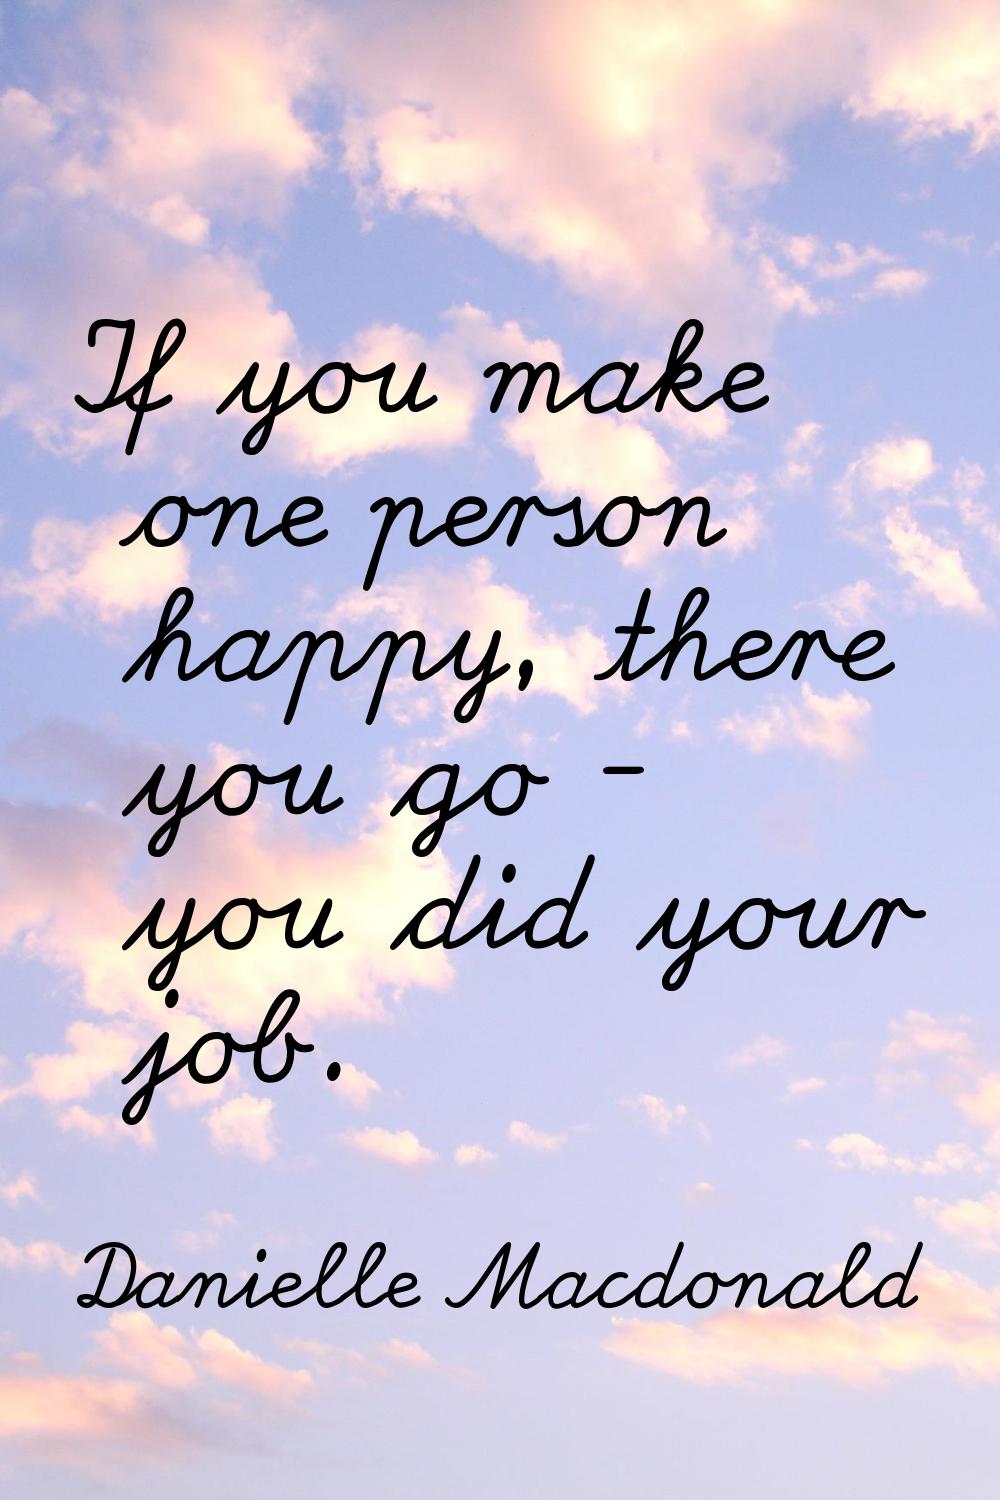 If you make one person happy, there you go - you did your job.